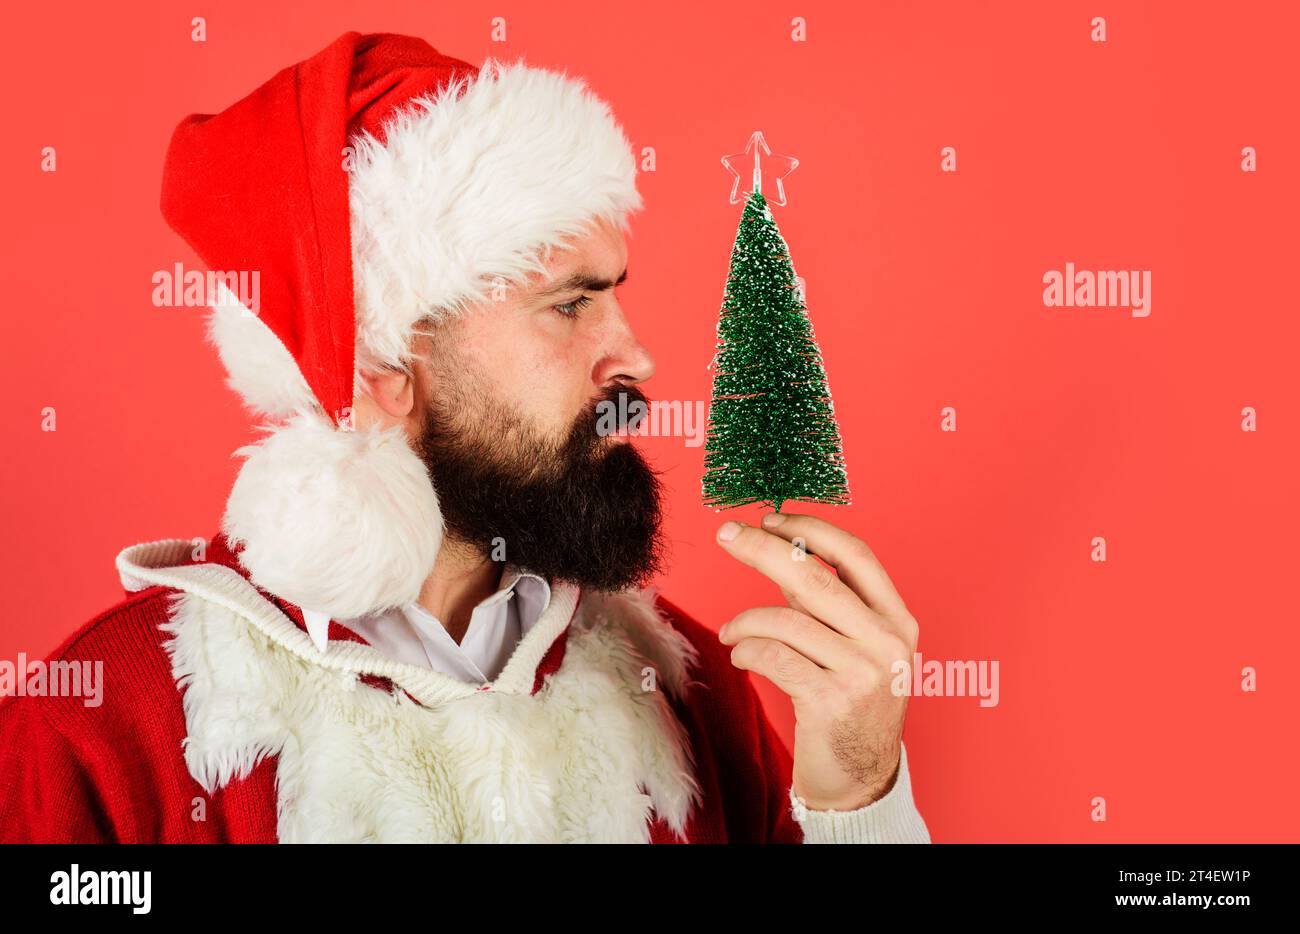 Christmas and New Year celebration. Closeup portrait of Santa Claus with little Christmas tree in hand. Serious bearded man in Santa costume with Stock Photo